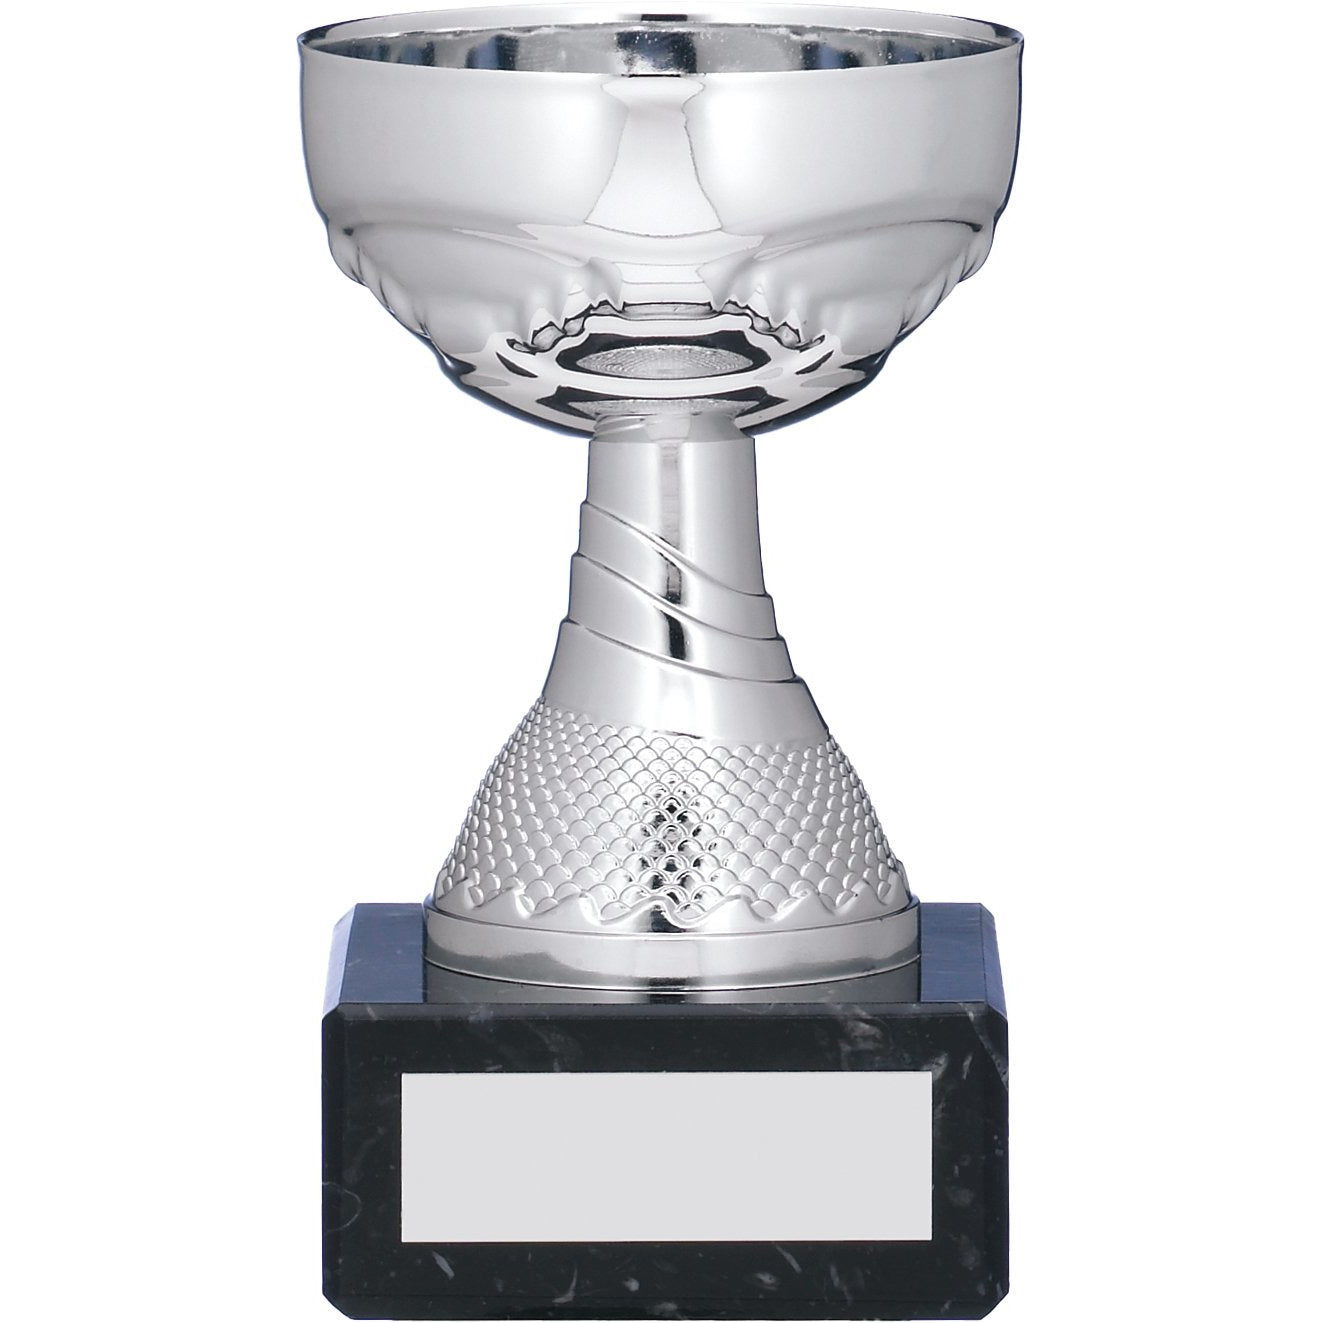 Silver Cup Trophy on Black Marble Base